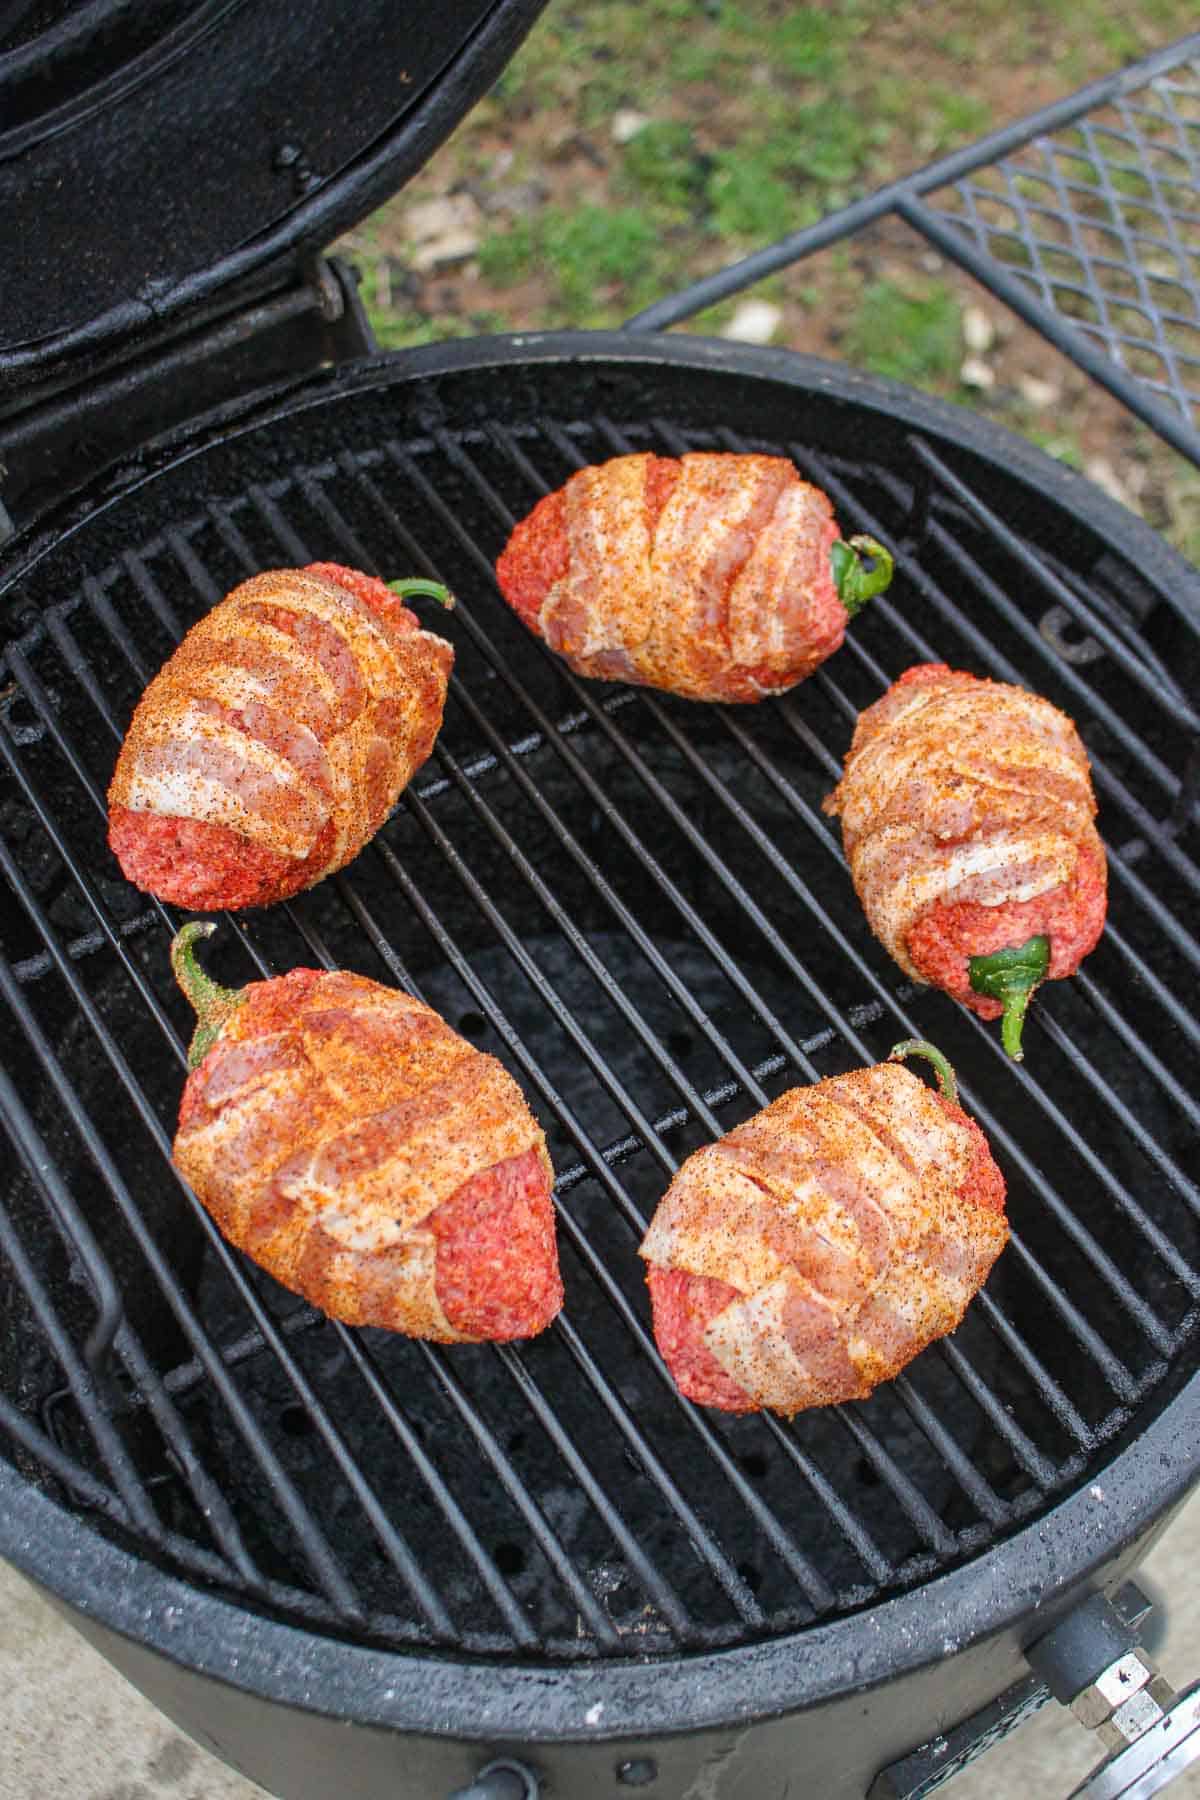 The seasoned and raw beef armadillo eggs placed on the smoker.